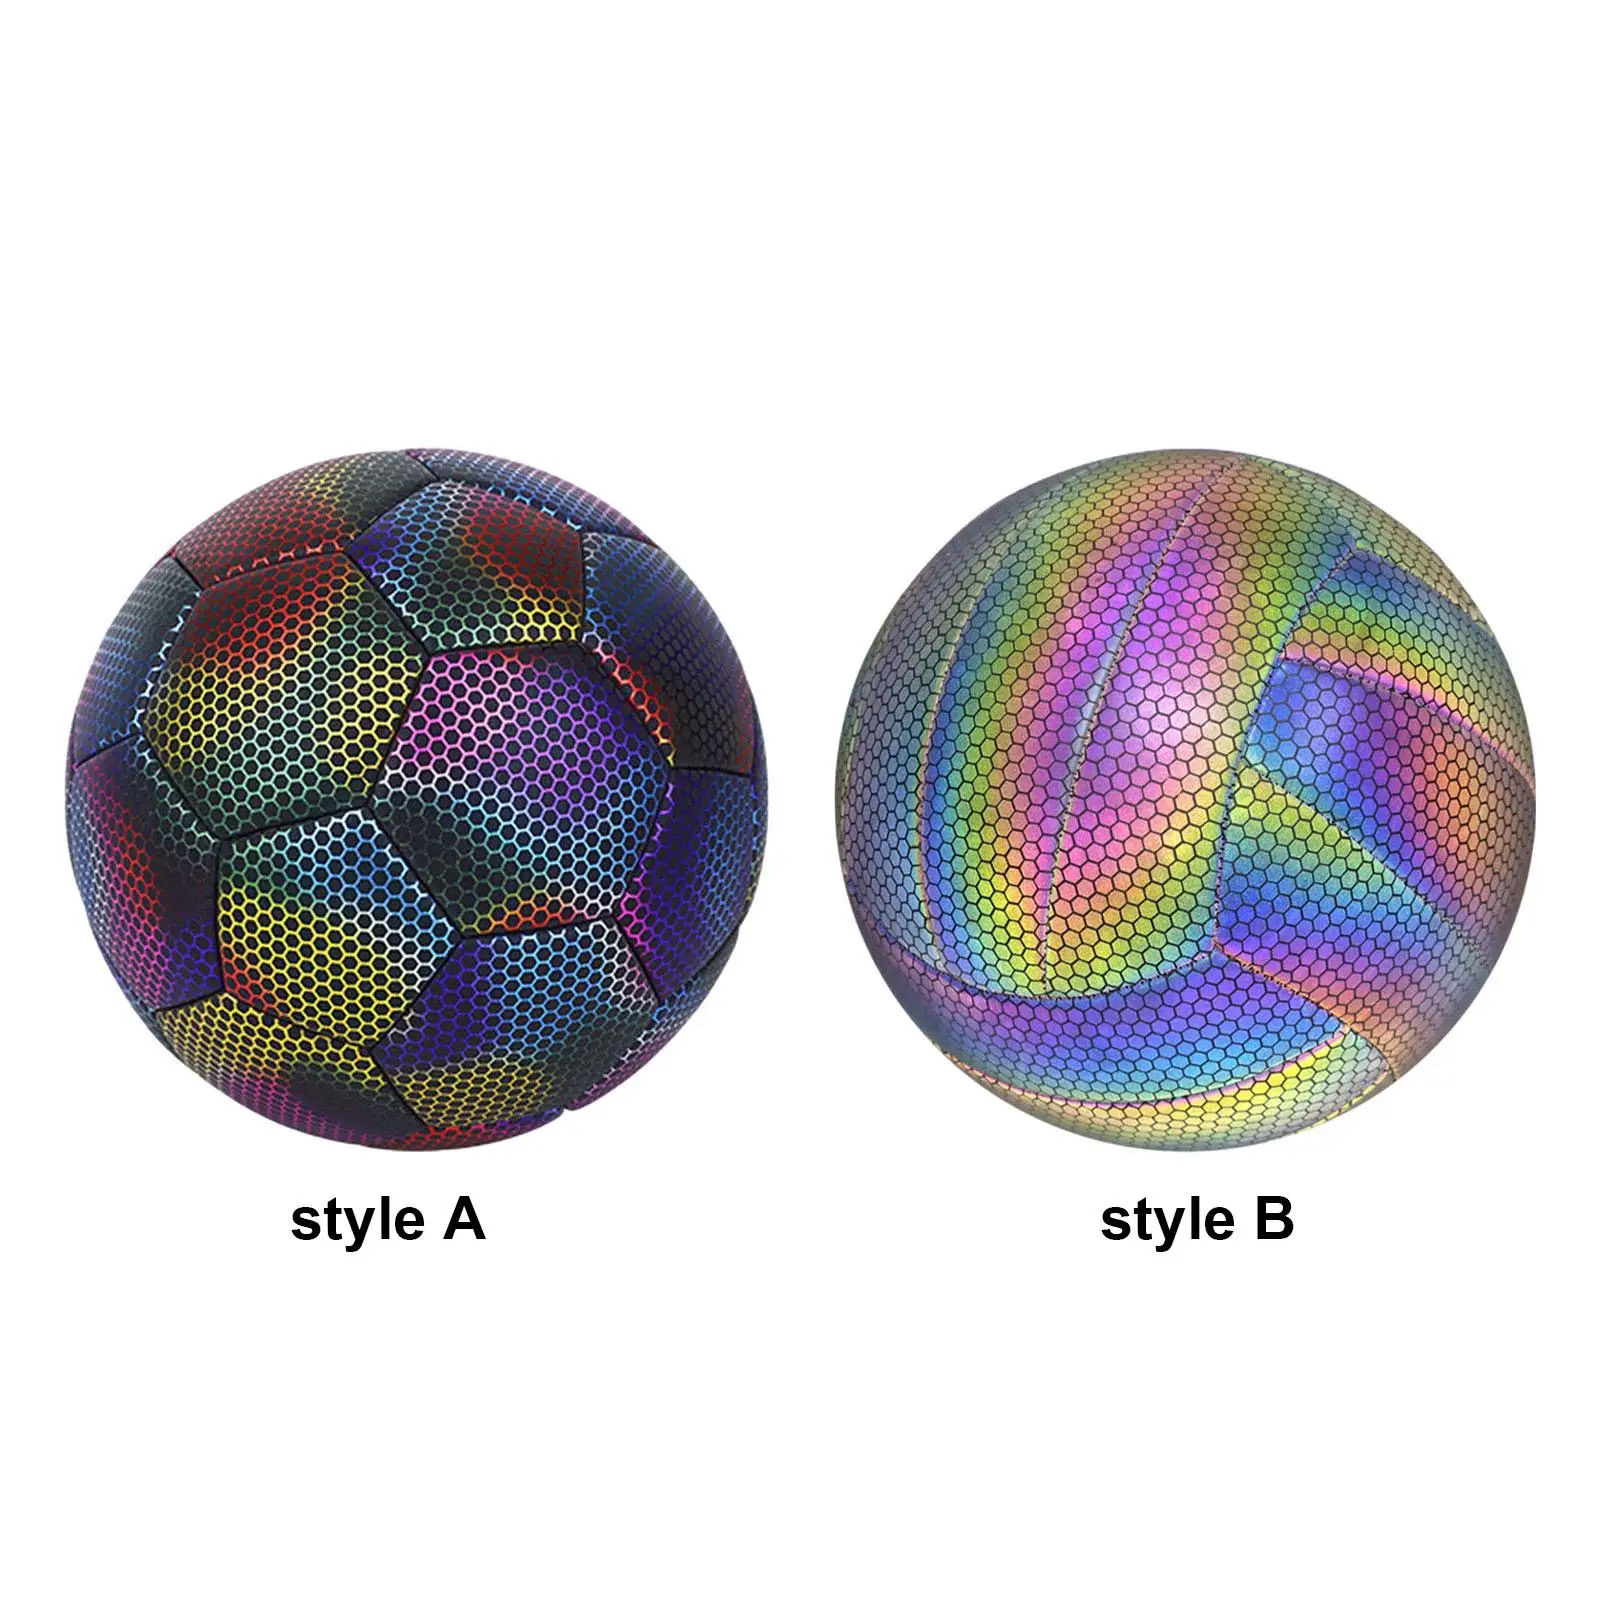 

Holographic Reflective Soccer Ball Size 5 High Visibility for Night Game and Training Sessions Gift for Soccer Competition